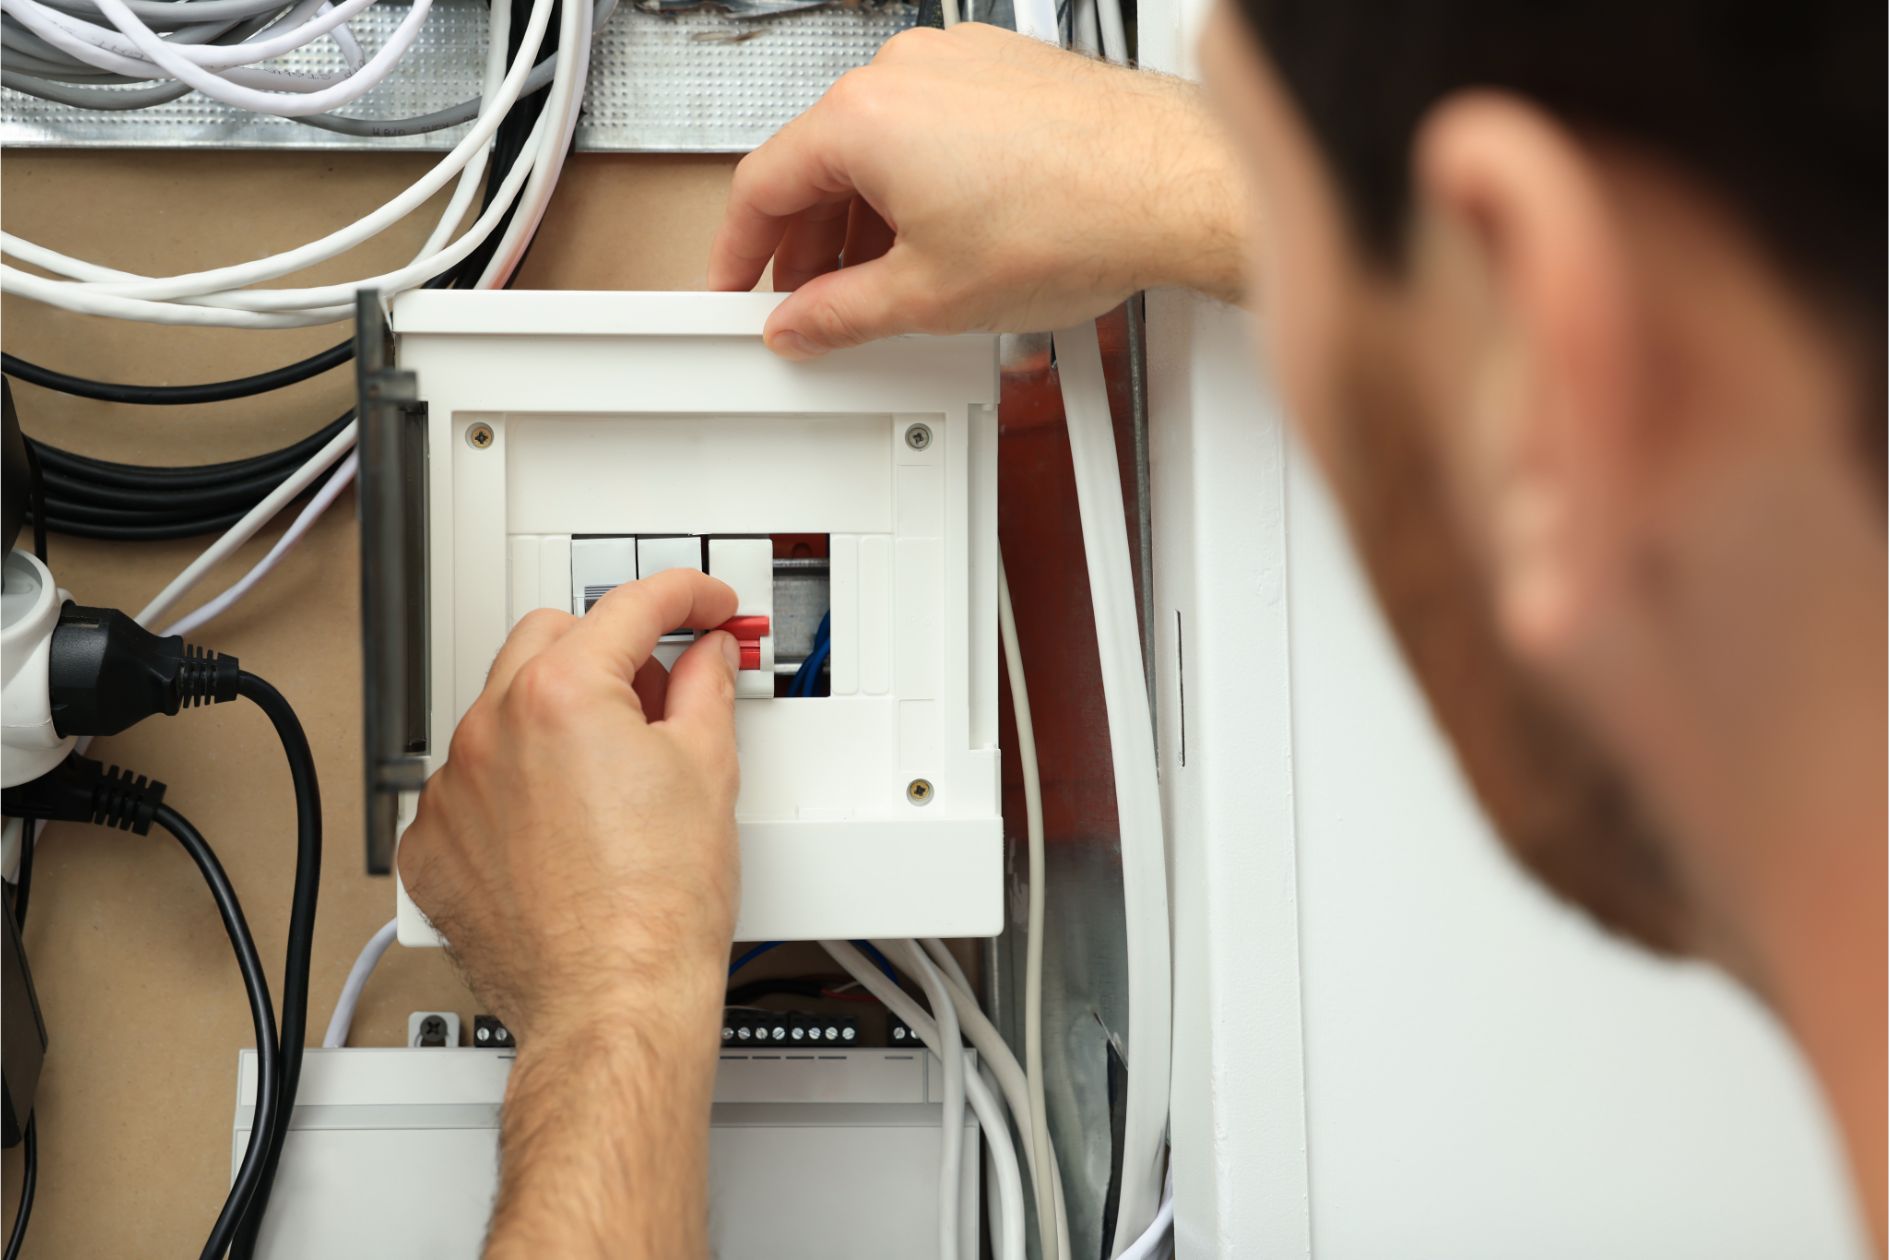 Troubleshooting Electrical Supplies: When to Replace and Upgrade